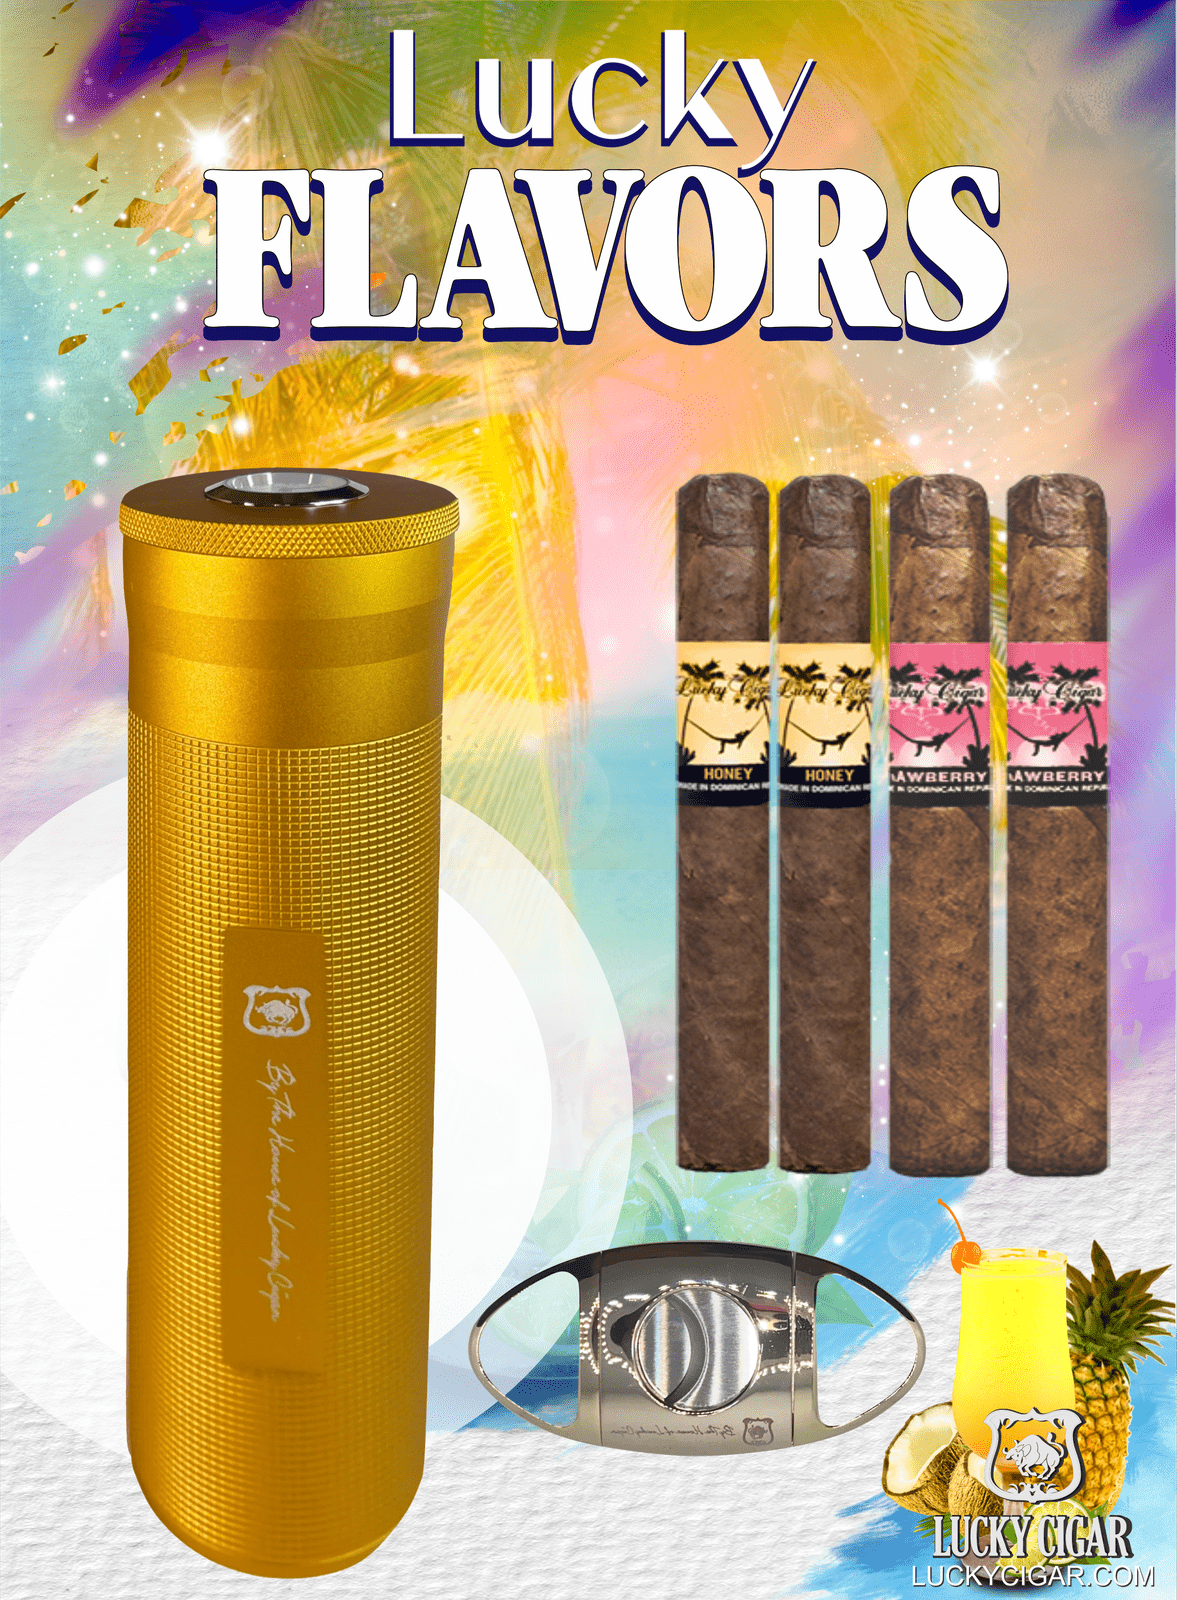 Flavored Cigars: Lucky Flavors 4 Cigar Set with Travel Humidor and Cutter